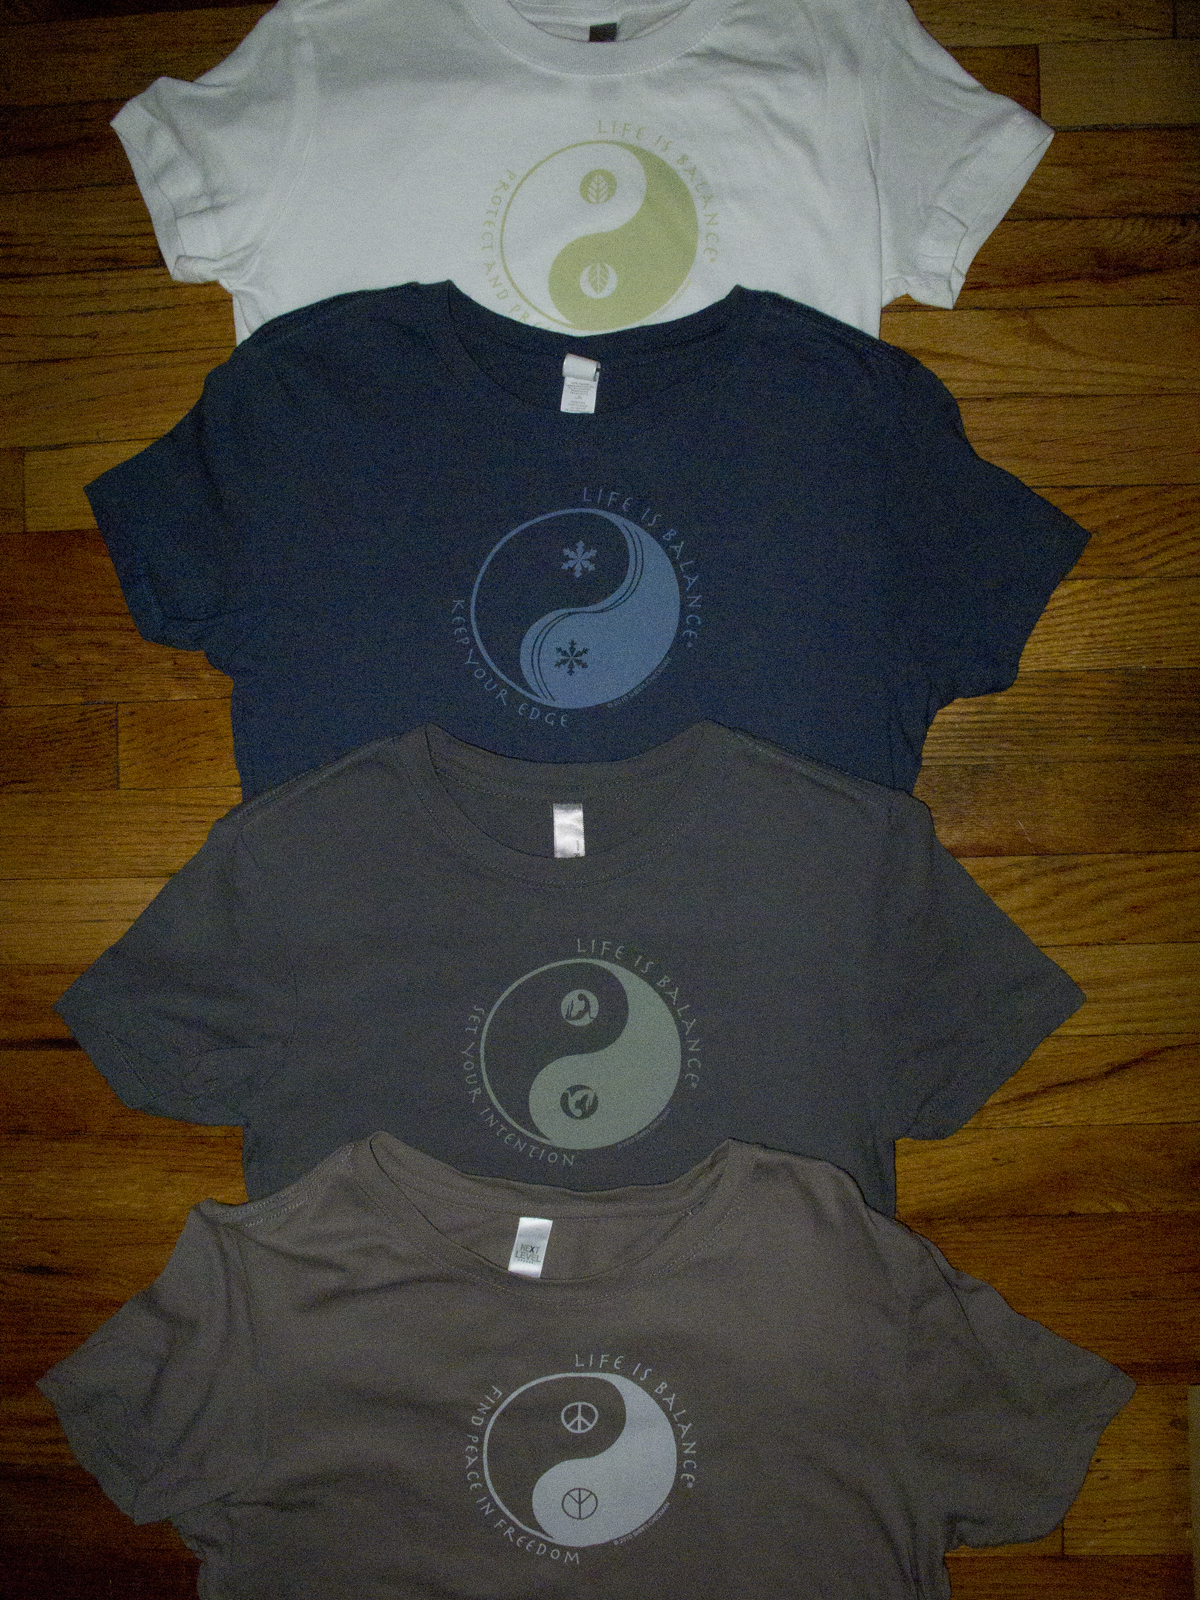 Life is Balance T-Shirts – Hot Off the Press!